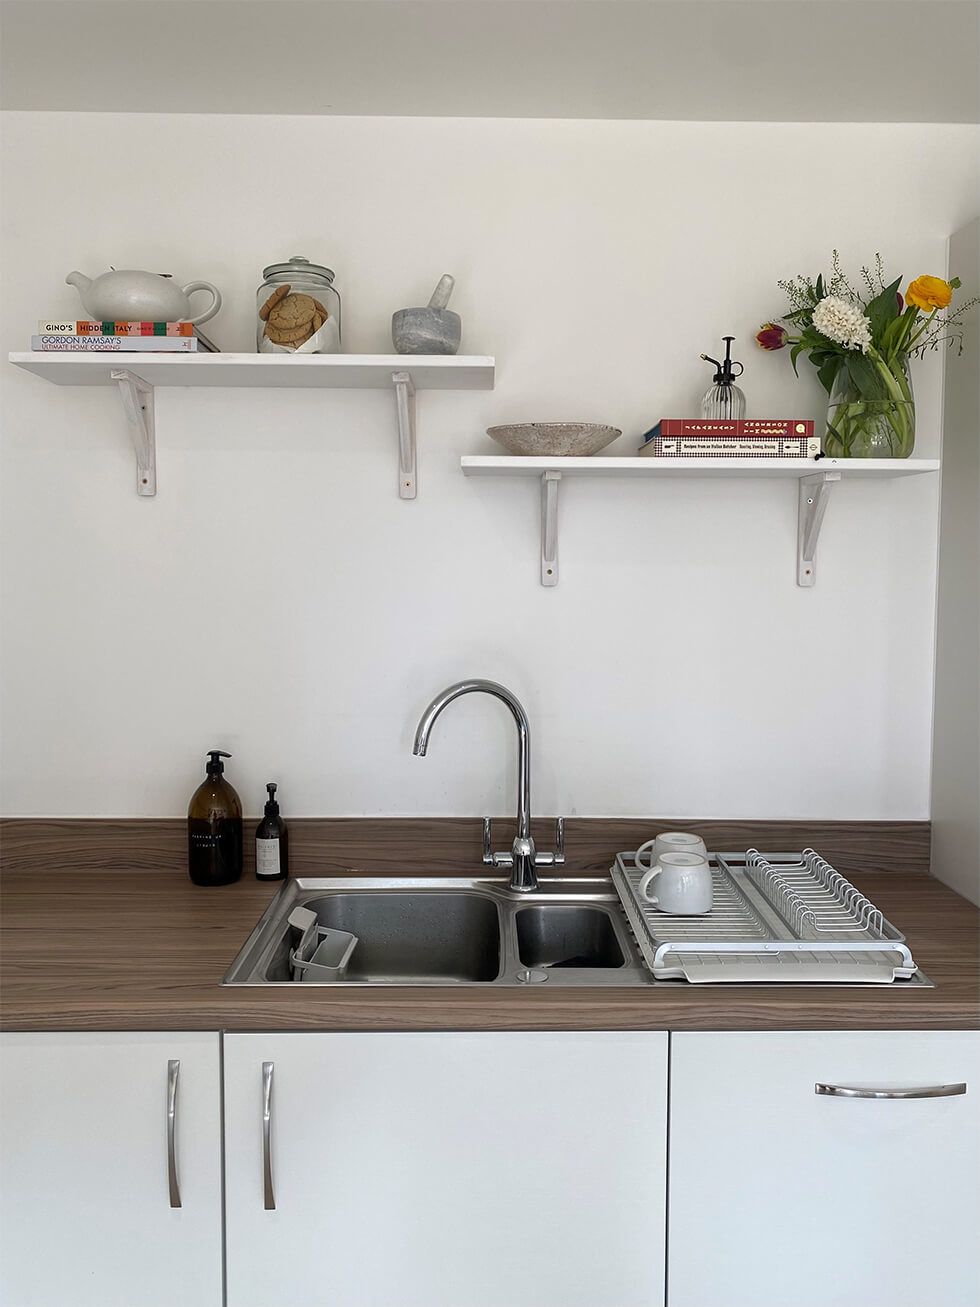 A kitchen sink with open shelving above it